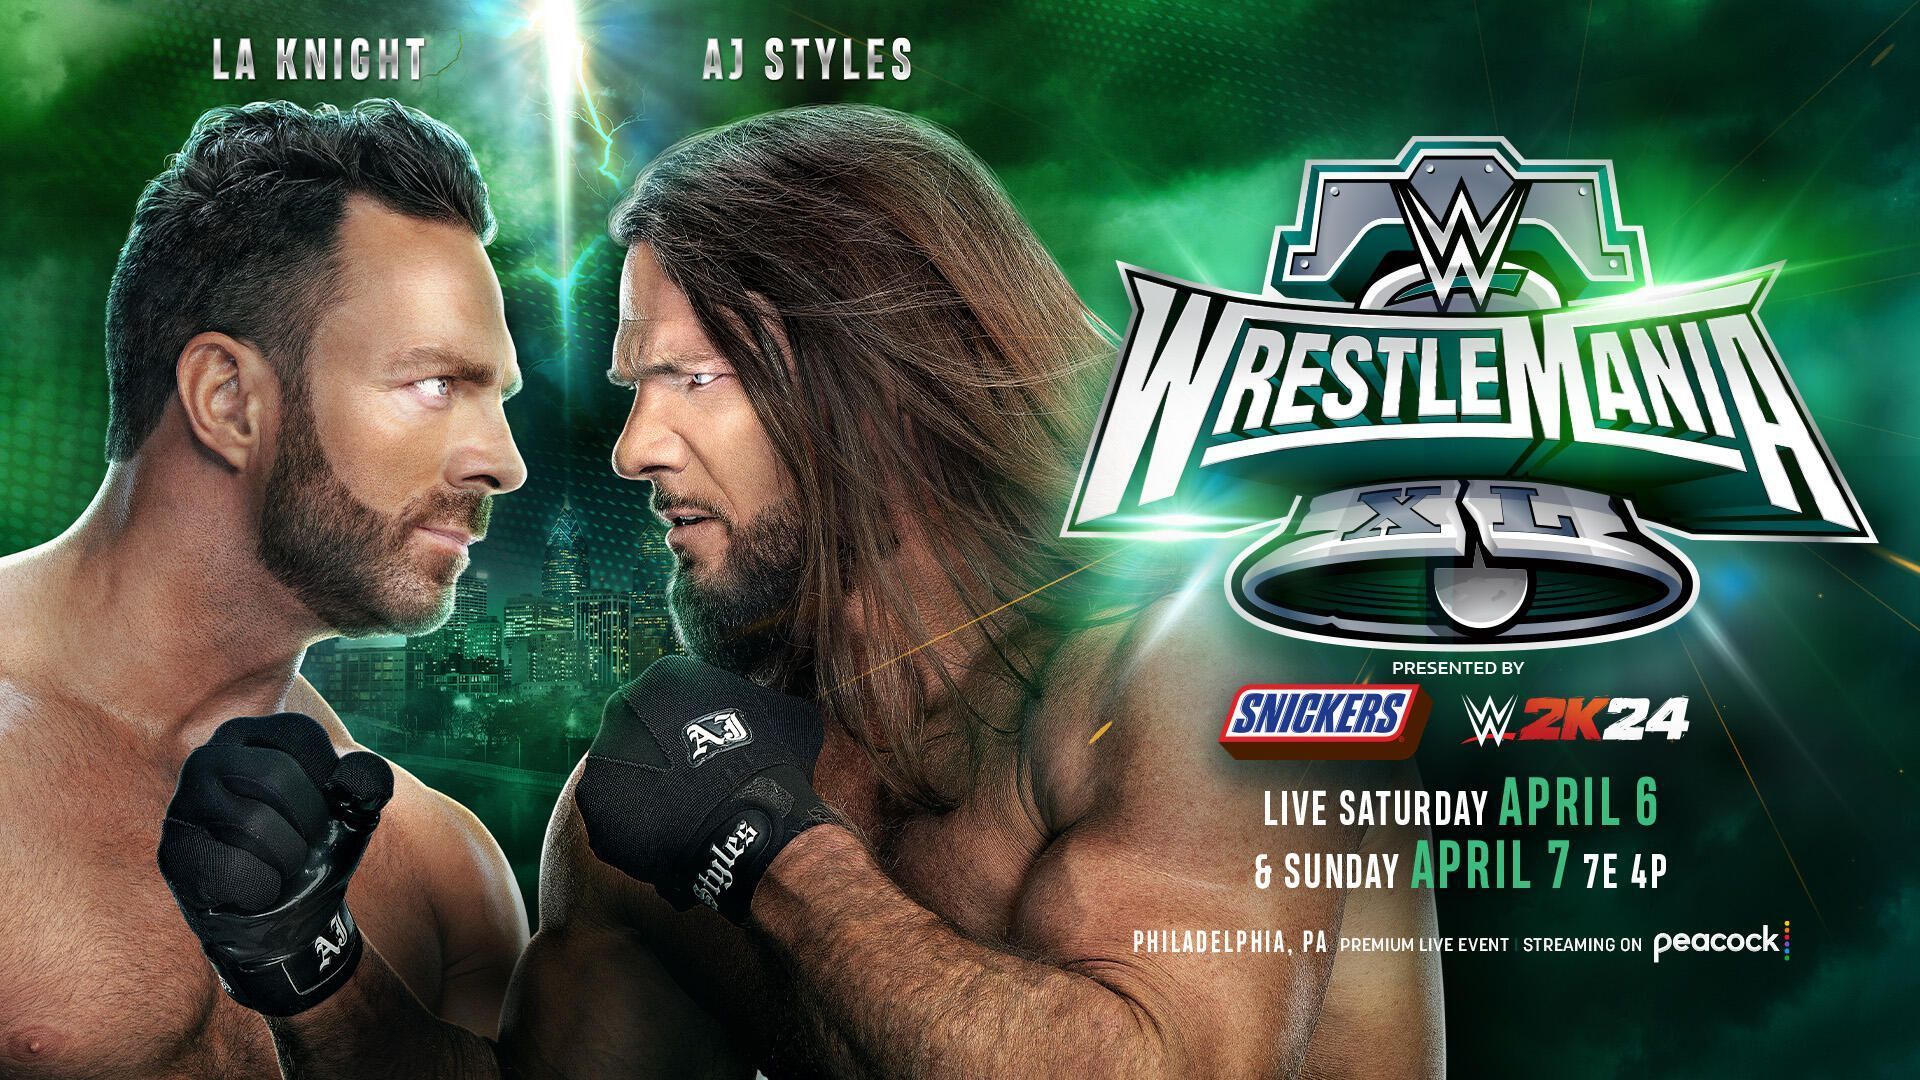 The official WWE graphic for LA Knight and AJ Styles